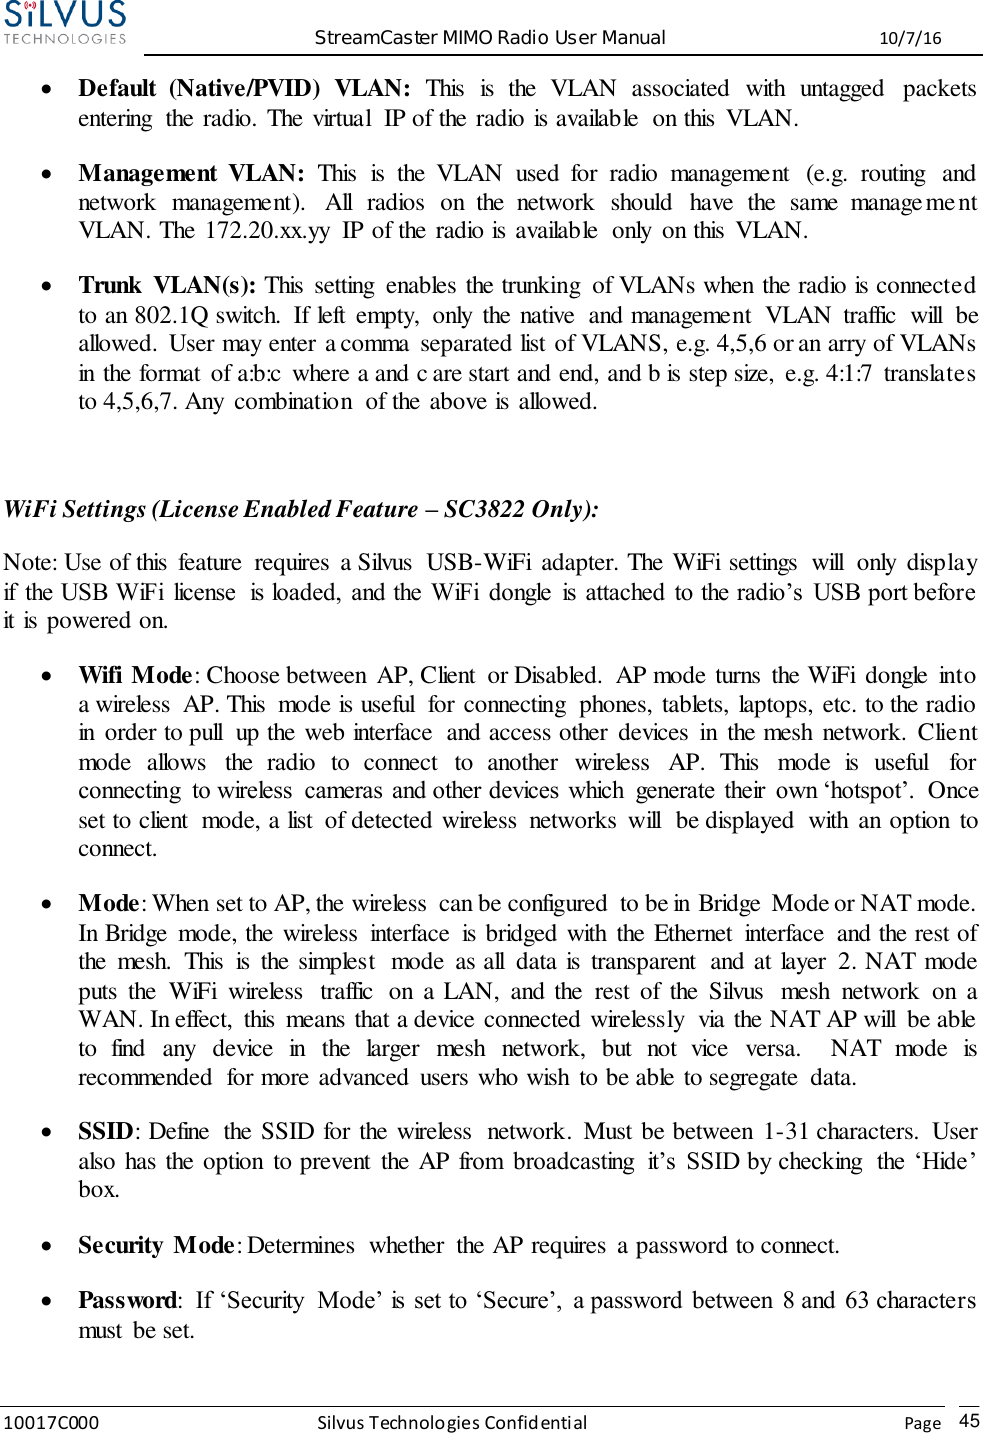  StreamCaster MIMO Radio User Manual  10/7/16 10017C000 Silvus Technologies Confidential    Page   45  Default  (Native/PVID)  VLAN:  This  is  the  VLAN  associated  with  untagged  packets entering  the radio. The virtual  IP of the radio is available  on this  VLAN.  Management  VLAN:  This  is  the  VLAN  used  for  radio  management  (e.g.  routing  and network  management).  All  radios  on  the  network  should  have  the  same  management VLAN. The 172.20.xx.yy  IP of the radio is available  only  on this  VLAN.  Trunk  VLAN(s): This  setting  enables the trunking  of VLANs when the radio is connected to an 802.1Q switch.  If left  empty,  only  the native  and management  VLAN  traffic  will  be allowed.  User may enter a comma  separated list of VLANS, e.g. 4,5,6 or an arry of VLANs in the format  of a:b:c  where a and c are start and end, and b is step size,  e.g. 4:1:7  translates to 4,5,6,7. Any  combination  of the above is allowed.  WiFi Settings (License Enabled Feature – SC3822 Only): Note: Use of this  feature  requires  a Silvus  USB-WiFi  adapter. The WiFi settings  will  only  display if  the USB WiFi  license  is loaded,  and the  WiFi  dongle  is  attached  to the radio’s  USB port before it is powered on.  Wifi Mode:  Choose between  AP, Client  or Disabled.  AP mode turns  the WiFi  dongle  into a wireless  AP. This  mode is useful  for connecting  phones, tablets, laptops, etc. to the radio in  order to pull  up the web interface  and access other  devices  in  the mesh  network.  Client mode  allows  the  radio  to  connect  to  another  wireless  AP.  This  mode  is  useful  for connecting  to wireless  cameras  and other devices  which  generate  their  own ‘hotspot’.  Once set to client  mode, a list  of detected wireless  networks  will  be displayed  with  an option  to connect.  Mode: When set to AP, the wireless  can be configured  to be in Bridge  Mode or NAT mode. In Bridge  mode, the wireless  interface  is bridged with  the Ethernet  interface  and the rest of the  mesh.  This  is  the simplest  mode  as all  data is  transparent  and at layer  2. NAT mode puts  the  WiFi  wireless  traffic  on  a LAN,  and the  rest  of  the  Silvus  mesh  network  on  a WAN. In effect,  this  means that a device connected wirelessly  via the NAT AP will  be able to  find  any  device  in  the  larger  mesh  network,  but  not  vice  versa.    NAT  mode  is recommended  for more advanced  users who wish  to be able to segregate  data.  SSID: Define  the SSID for the wireless  network.  Must be between  1-31 characters.  User also has the option  to prevent  the AP from  broadcasting  it’s  SSID by checking  the  ‘Hide’ box.  Security Mode: Determines  whether  the AP requires  a password to connect.  Password:  If  ‘Security  Mode’ is  set to ‘Secure’,  a password  between  8 and  63 characters must  be set. 